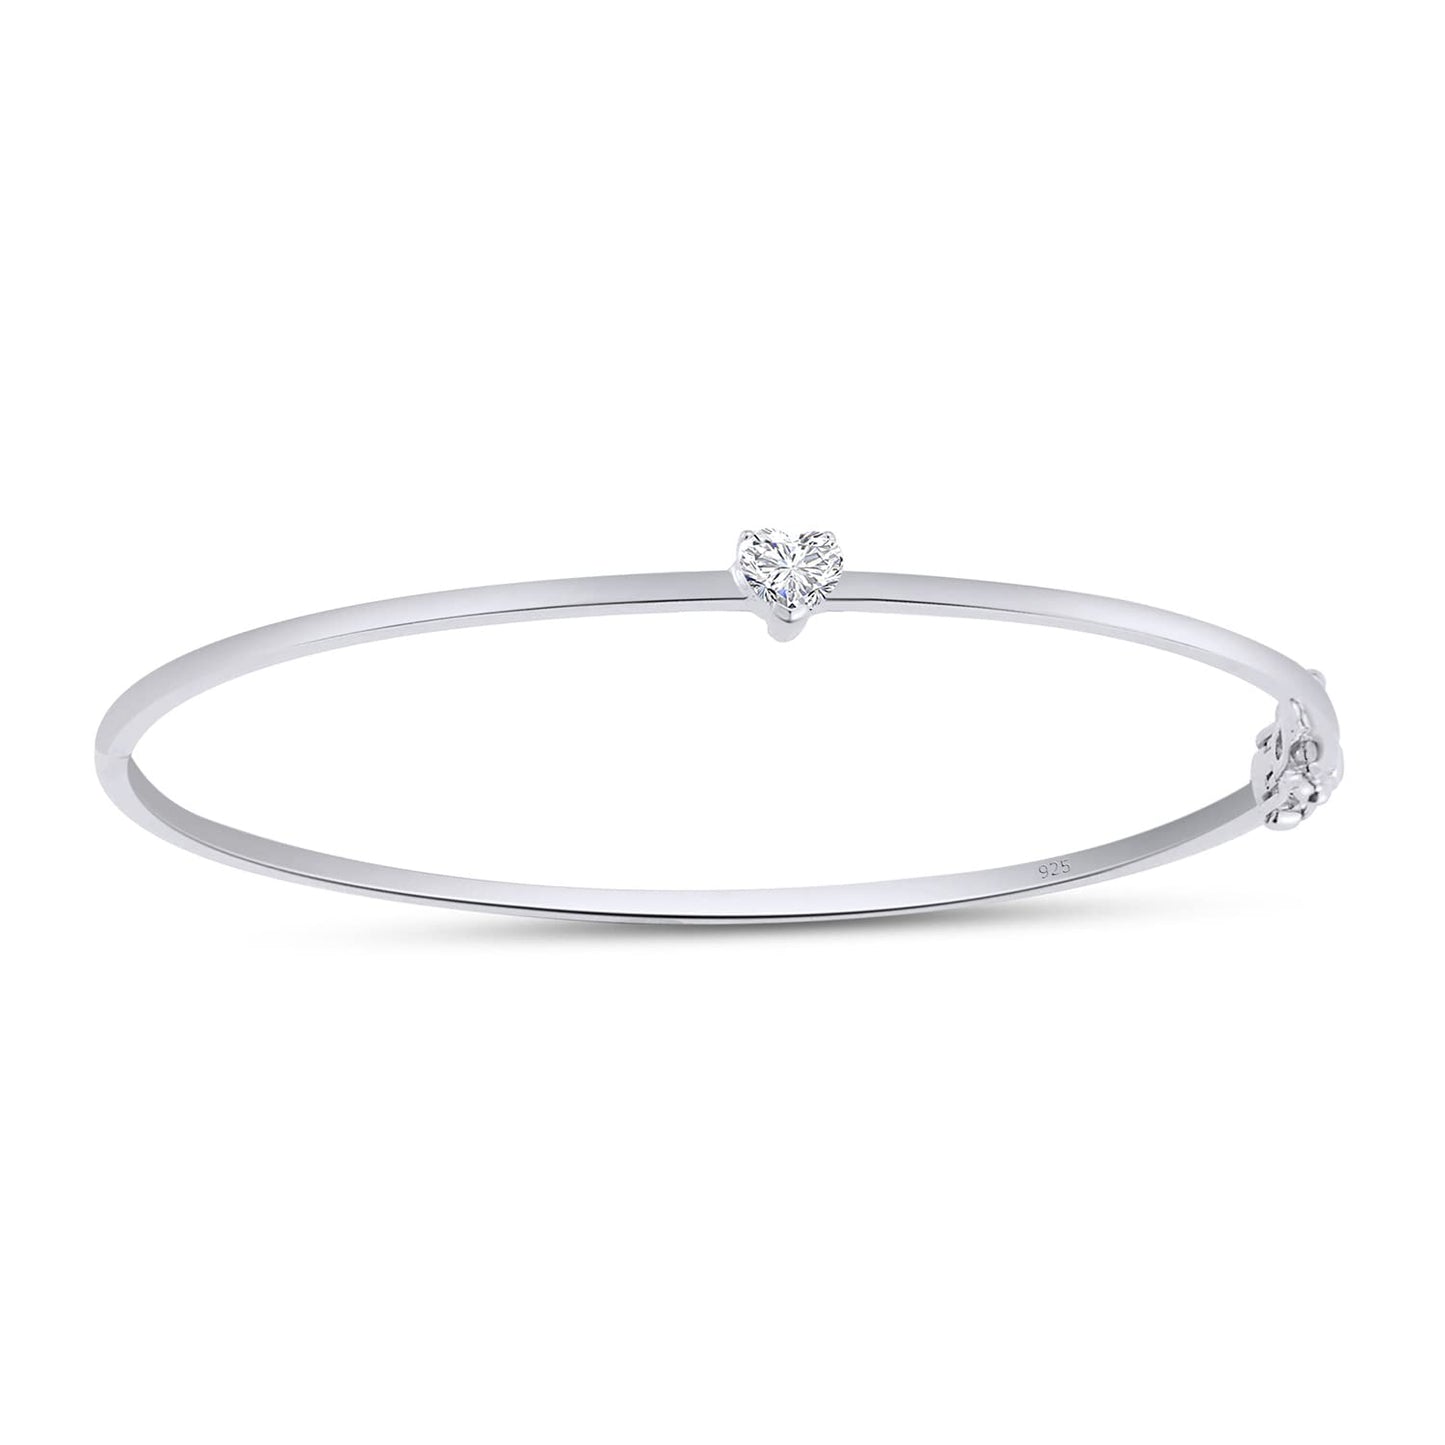 Heart Shape White Cubic Zirconia Solitaire Bangle Bracelet For Women In 925 Sterling Silver